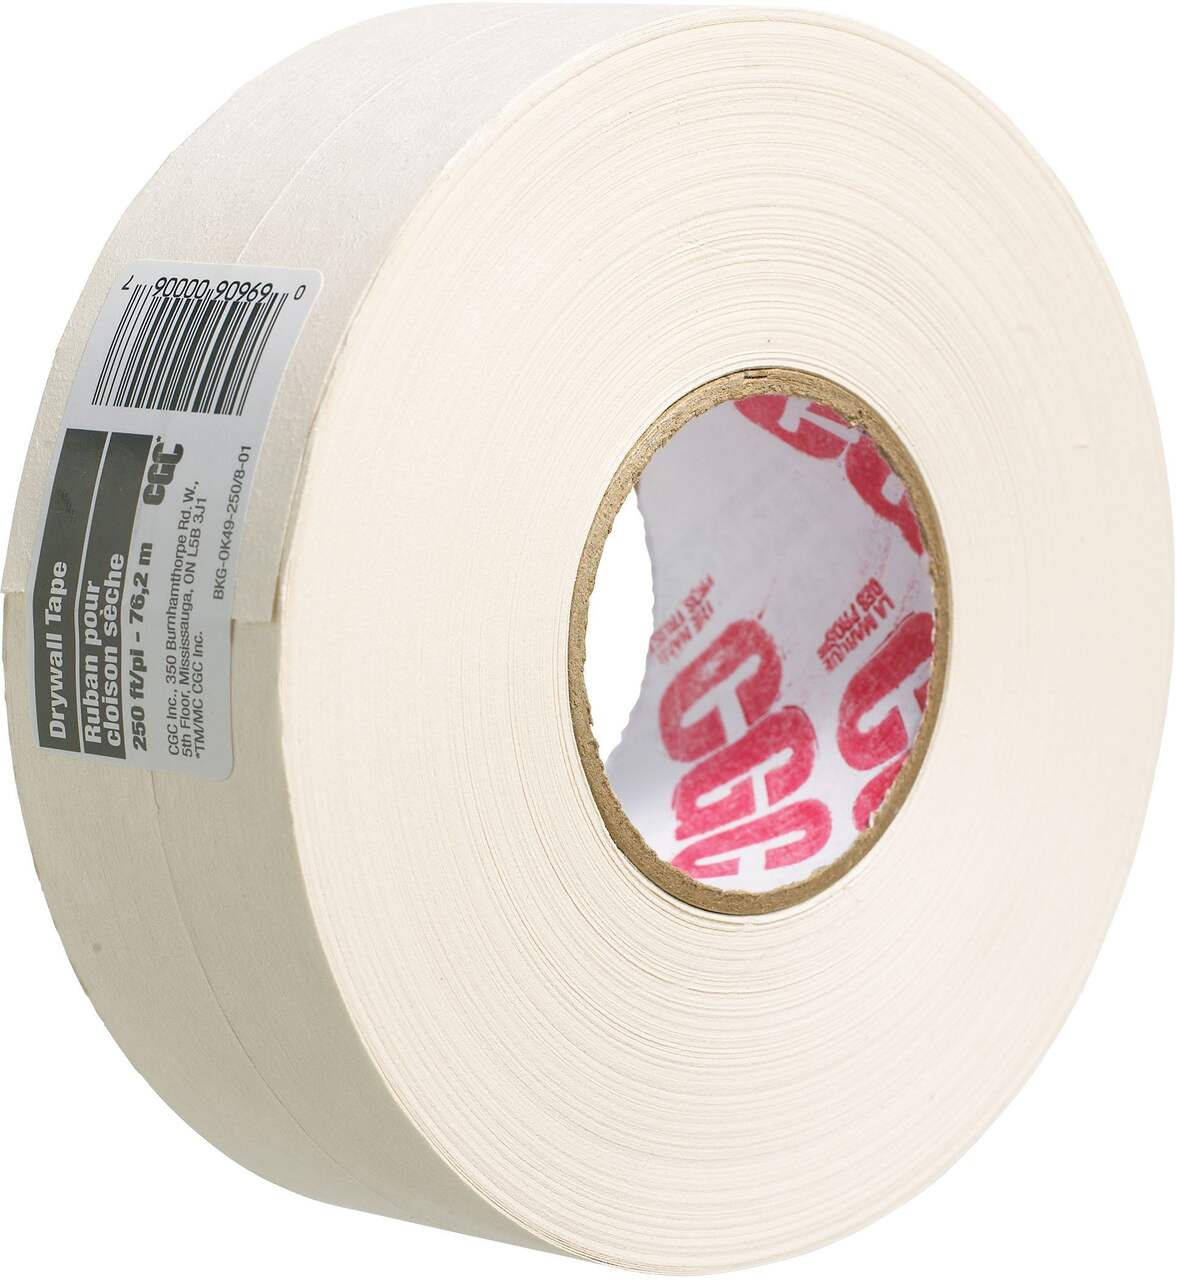 https://media-www.canadiantire.ca/product/fixing/paint/surface-prep-maintenance/0495039/cgc-joint-tape-250ft-c481408c-29ab-4fe0-9274-74061040234d-jpgrendition.jpg?imdensity=1&imwidth=640&impolicy=mZoom